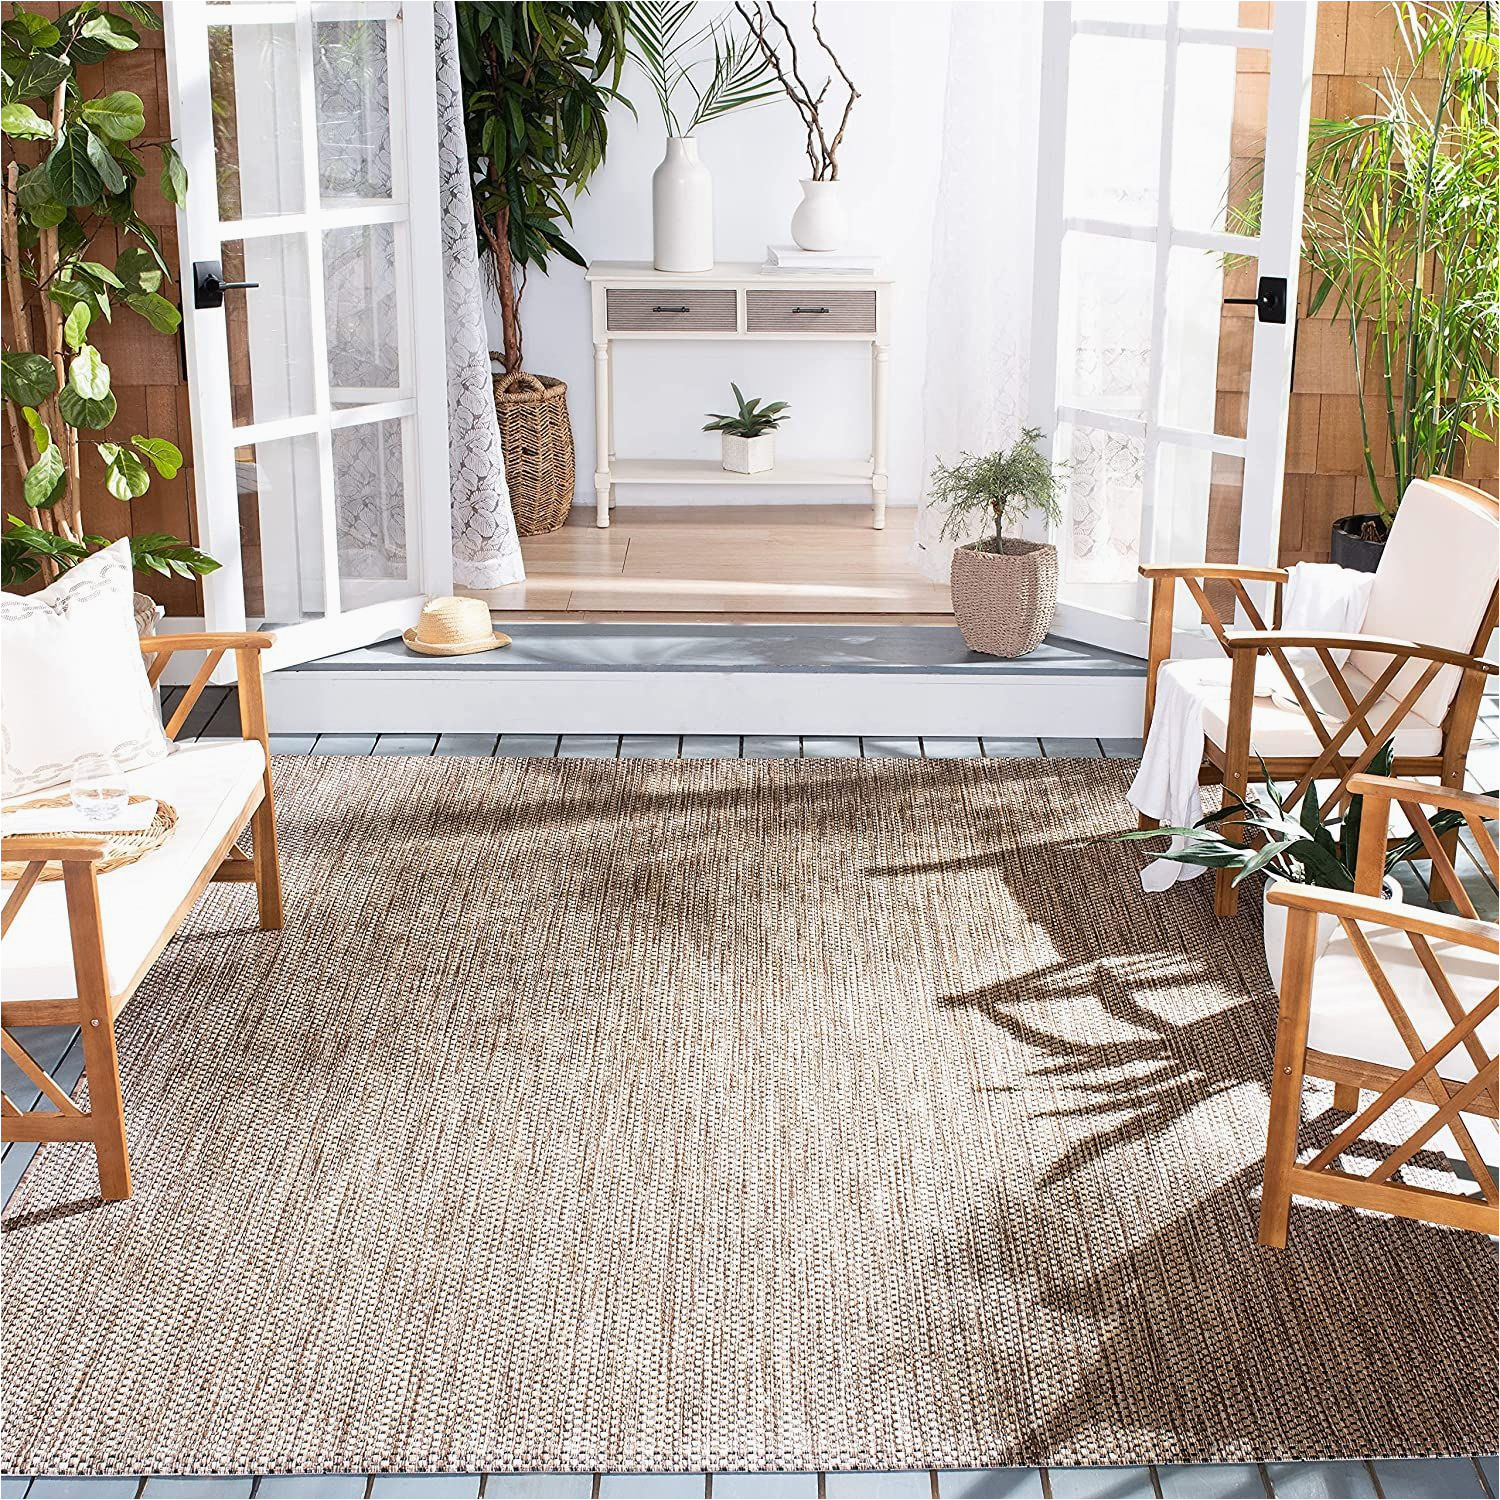 Home Depot area Rugs 12 X 14 the Best Amazon Outdoor Rugs Of 2022 and All are Under $100